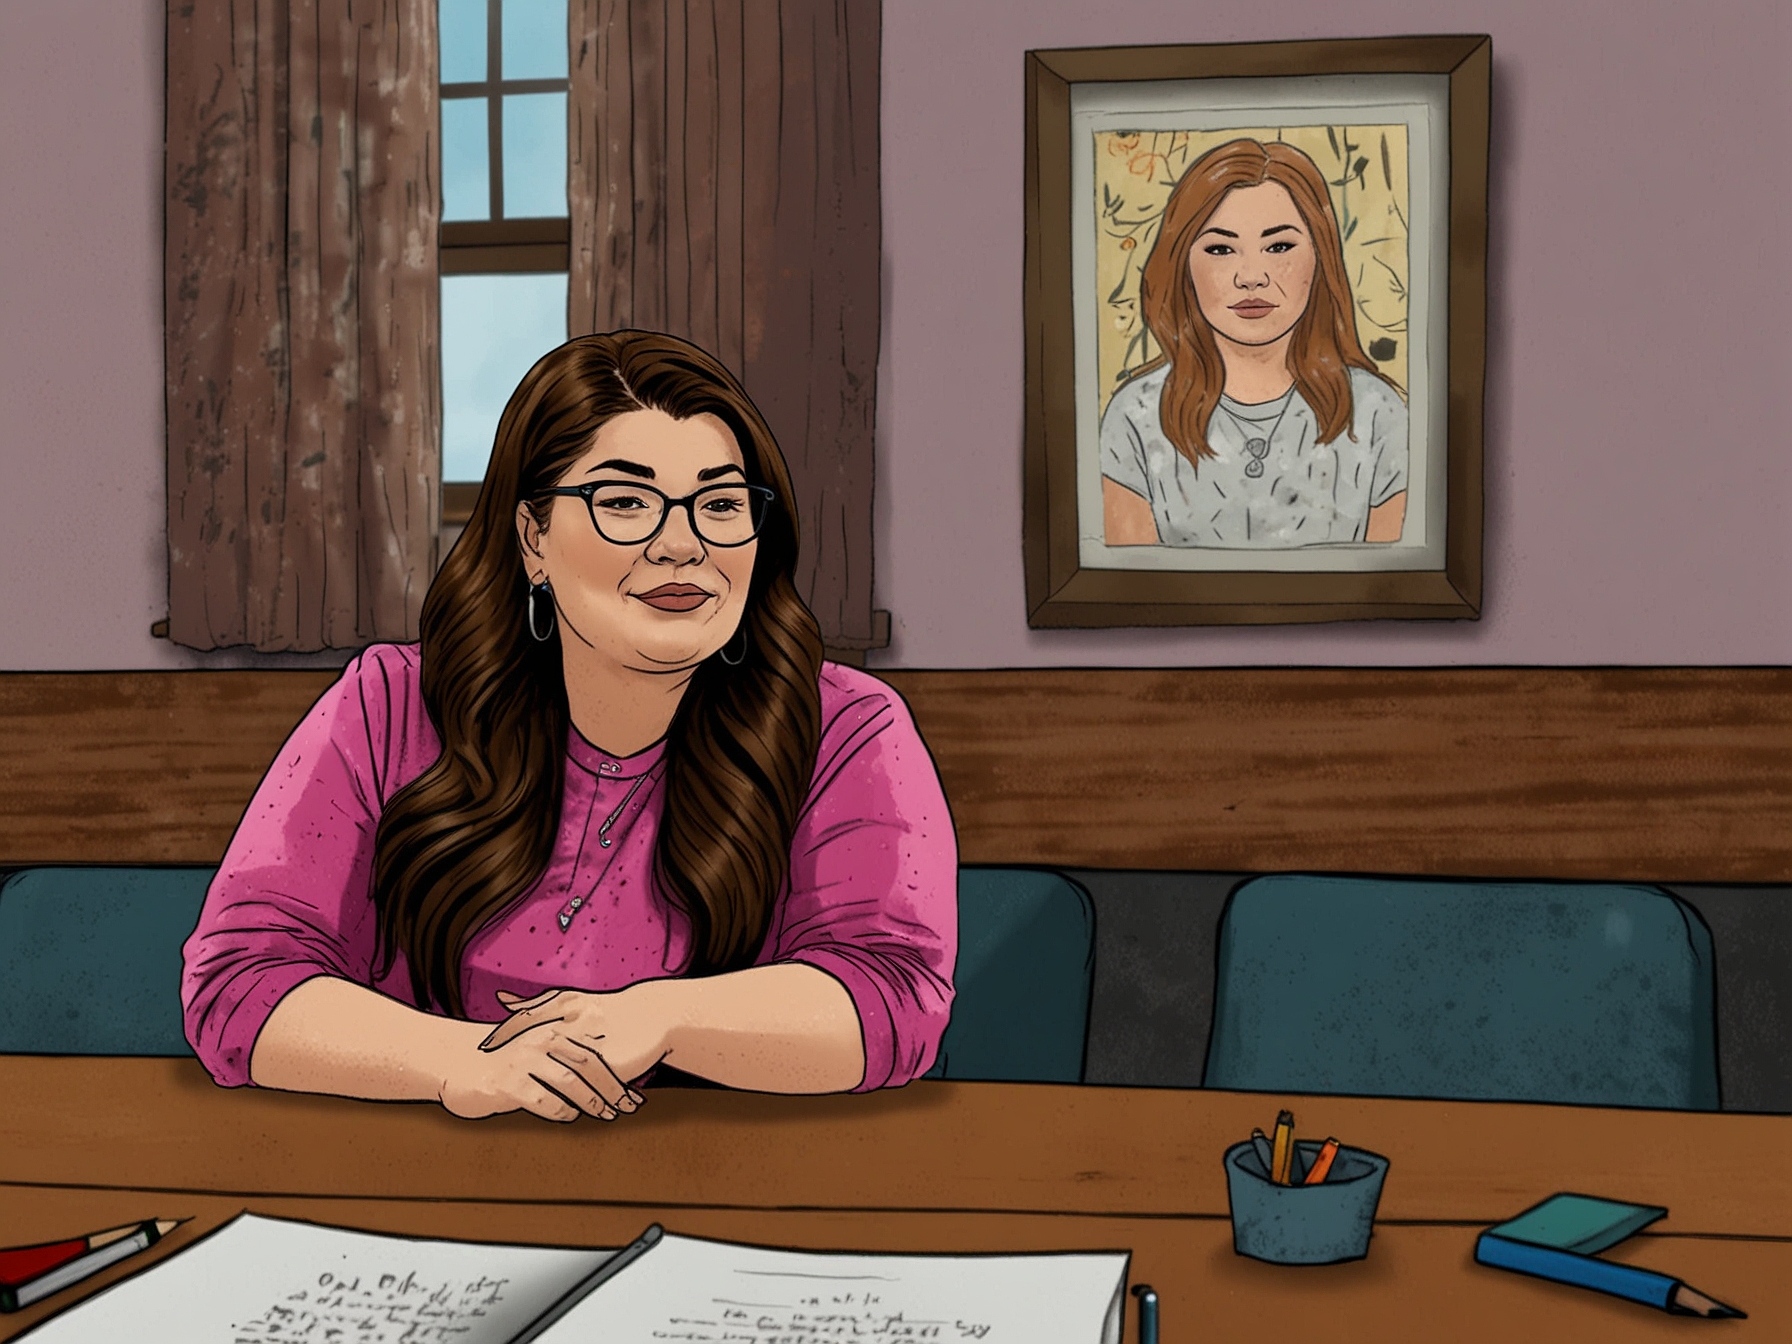 Amber Portwood sits candidly discussing her relationship with Gary Wayt on Teen Mom: The Next Chapter, showcasing her journey of self-awareness and resilience.